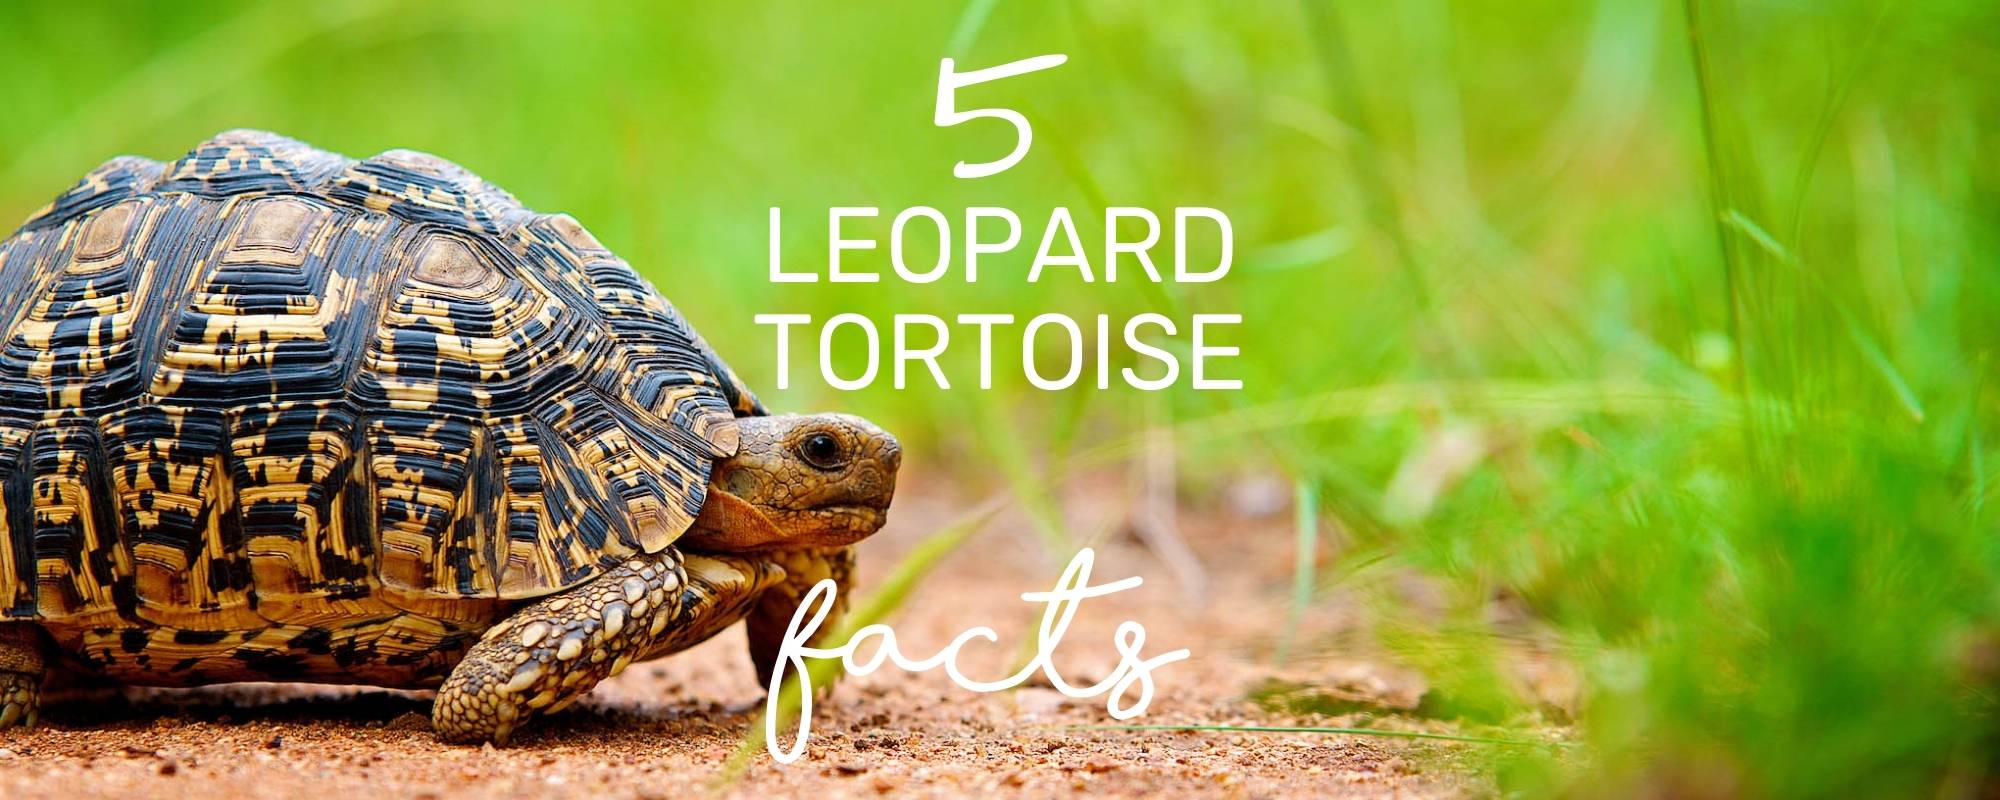 SLOW AND STEADY WINS THE RACE... HERE ARE 5 FACTS ABOUT LEOPARD TORTOISE!